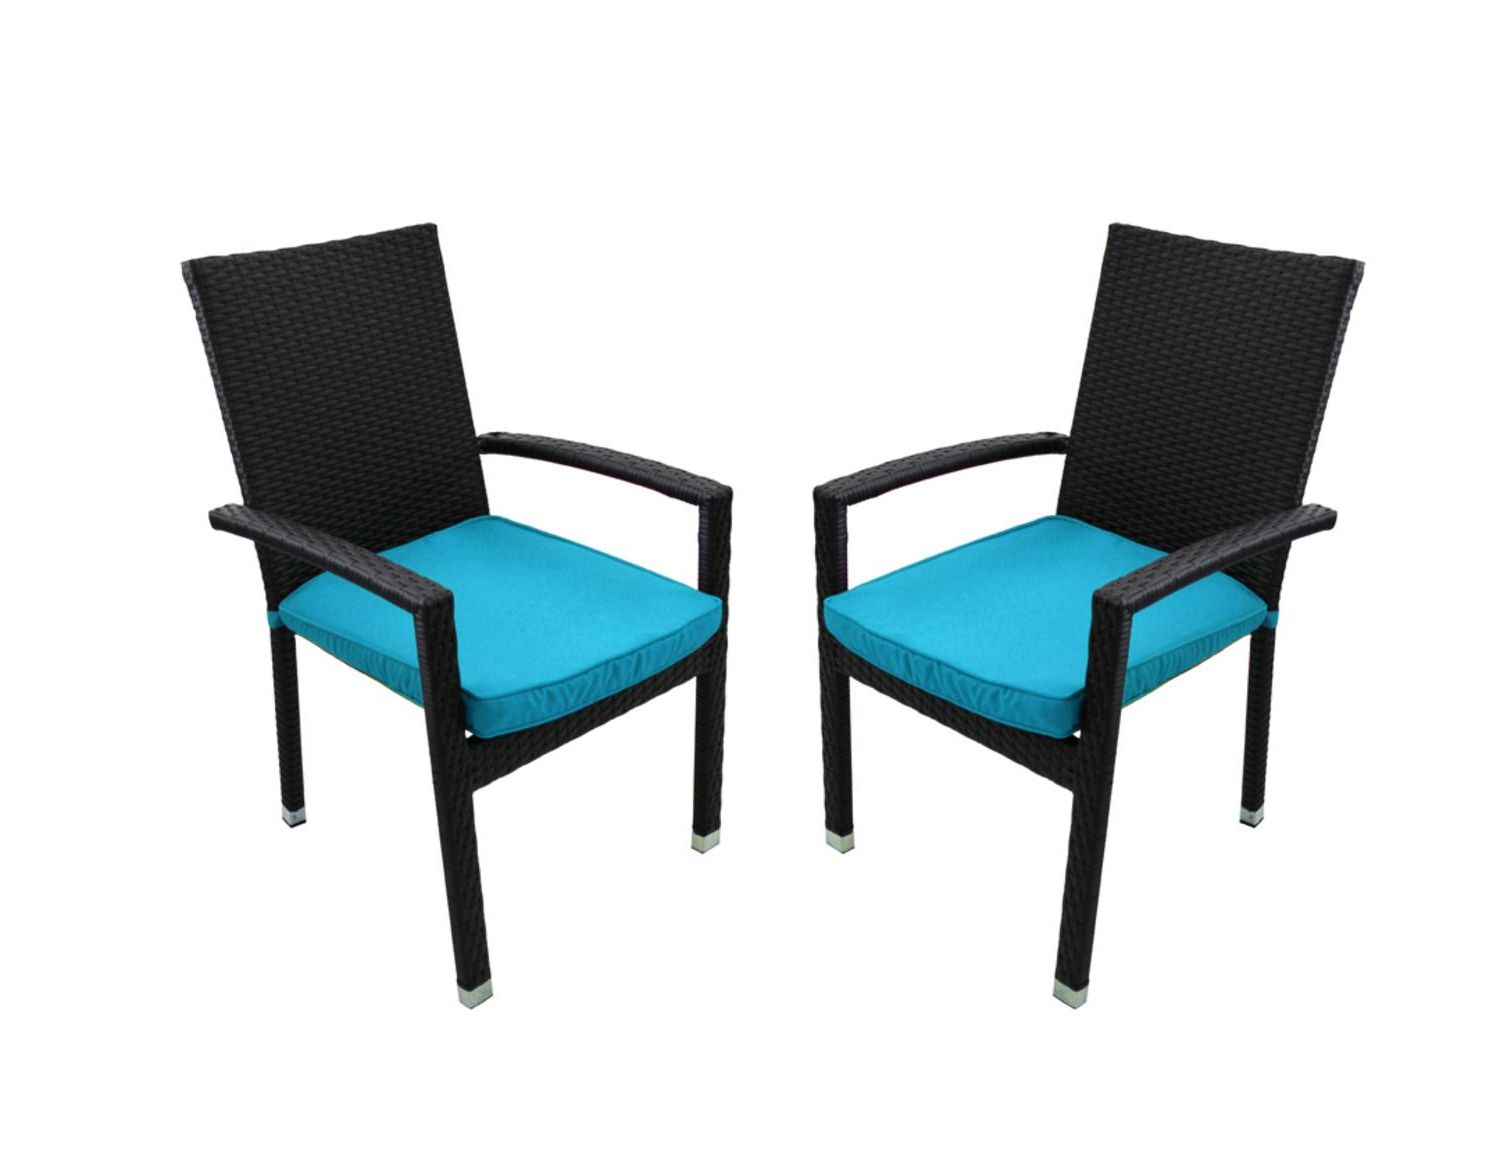 Widely Used Set Of 2 Black Resin Wicker Outdoor Patio Furniture Dining Chairs Inside Black Outdoor Dining Modern Chairs Sets (View 12 of 15)